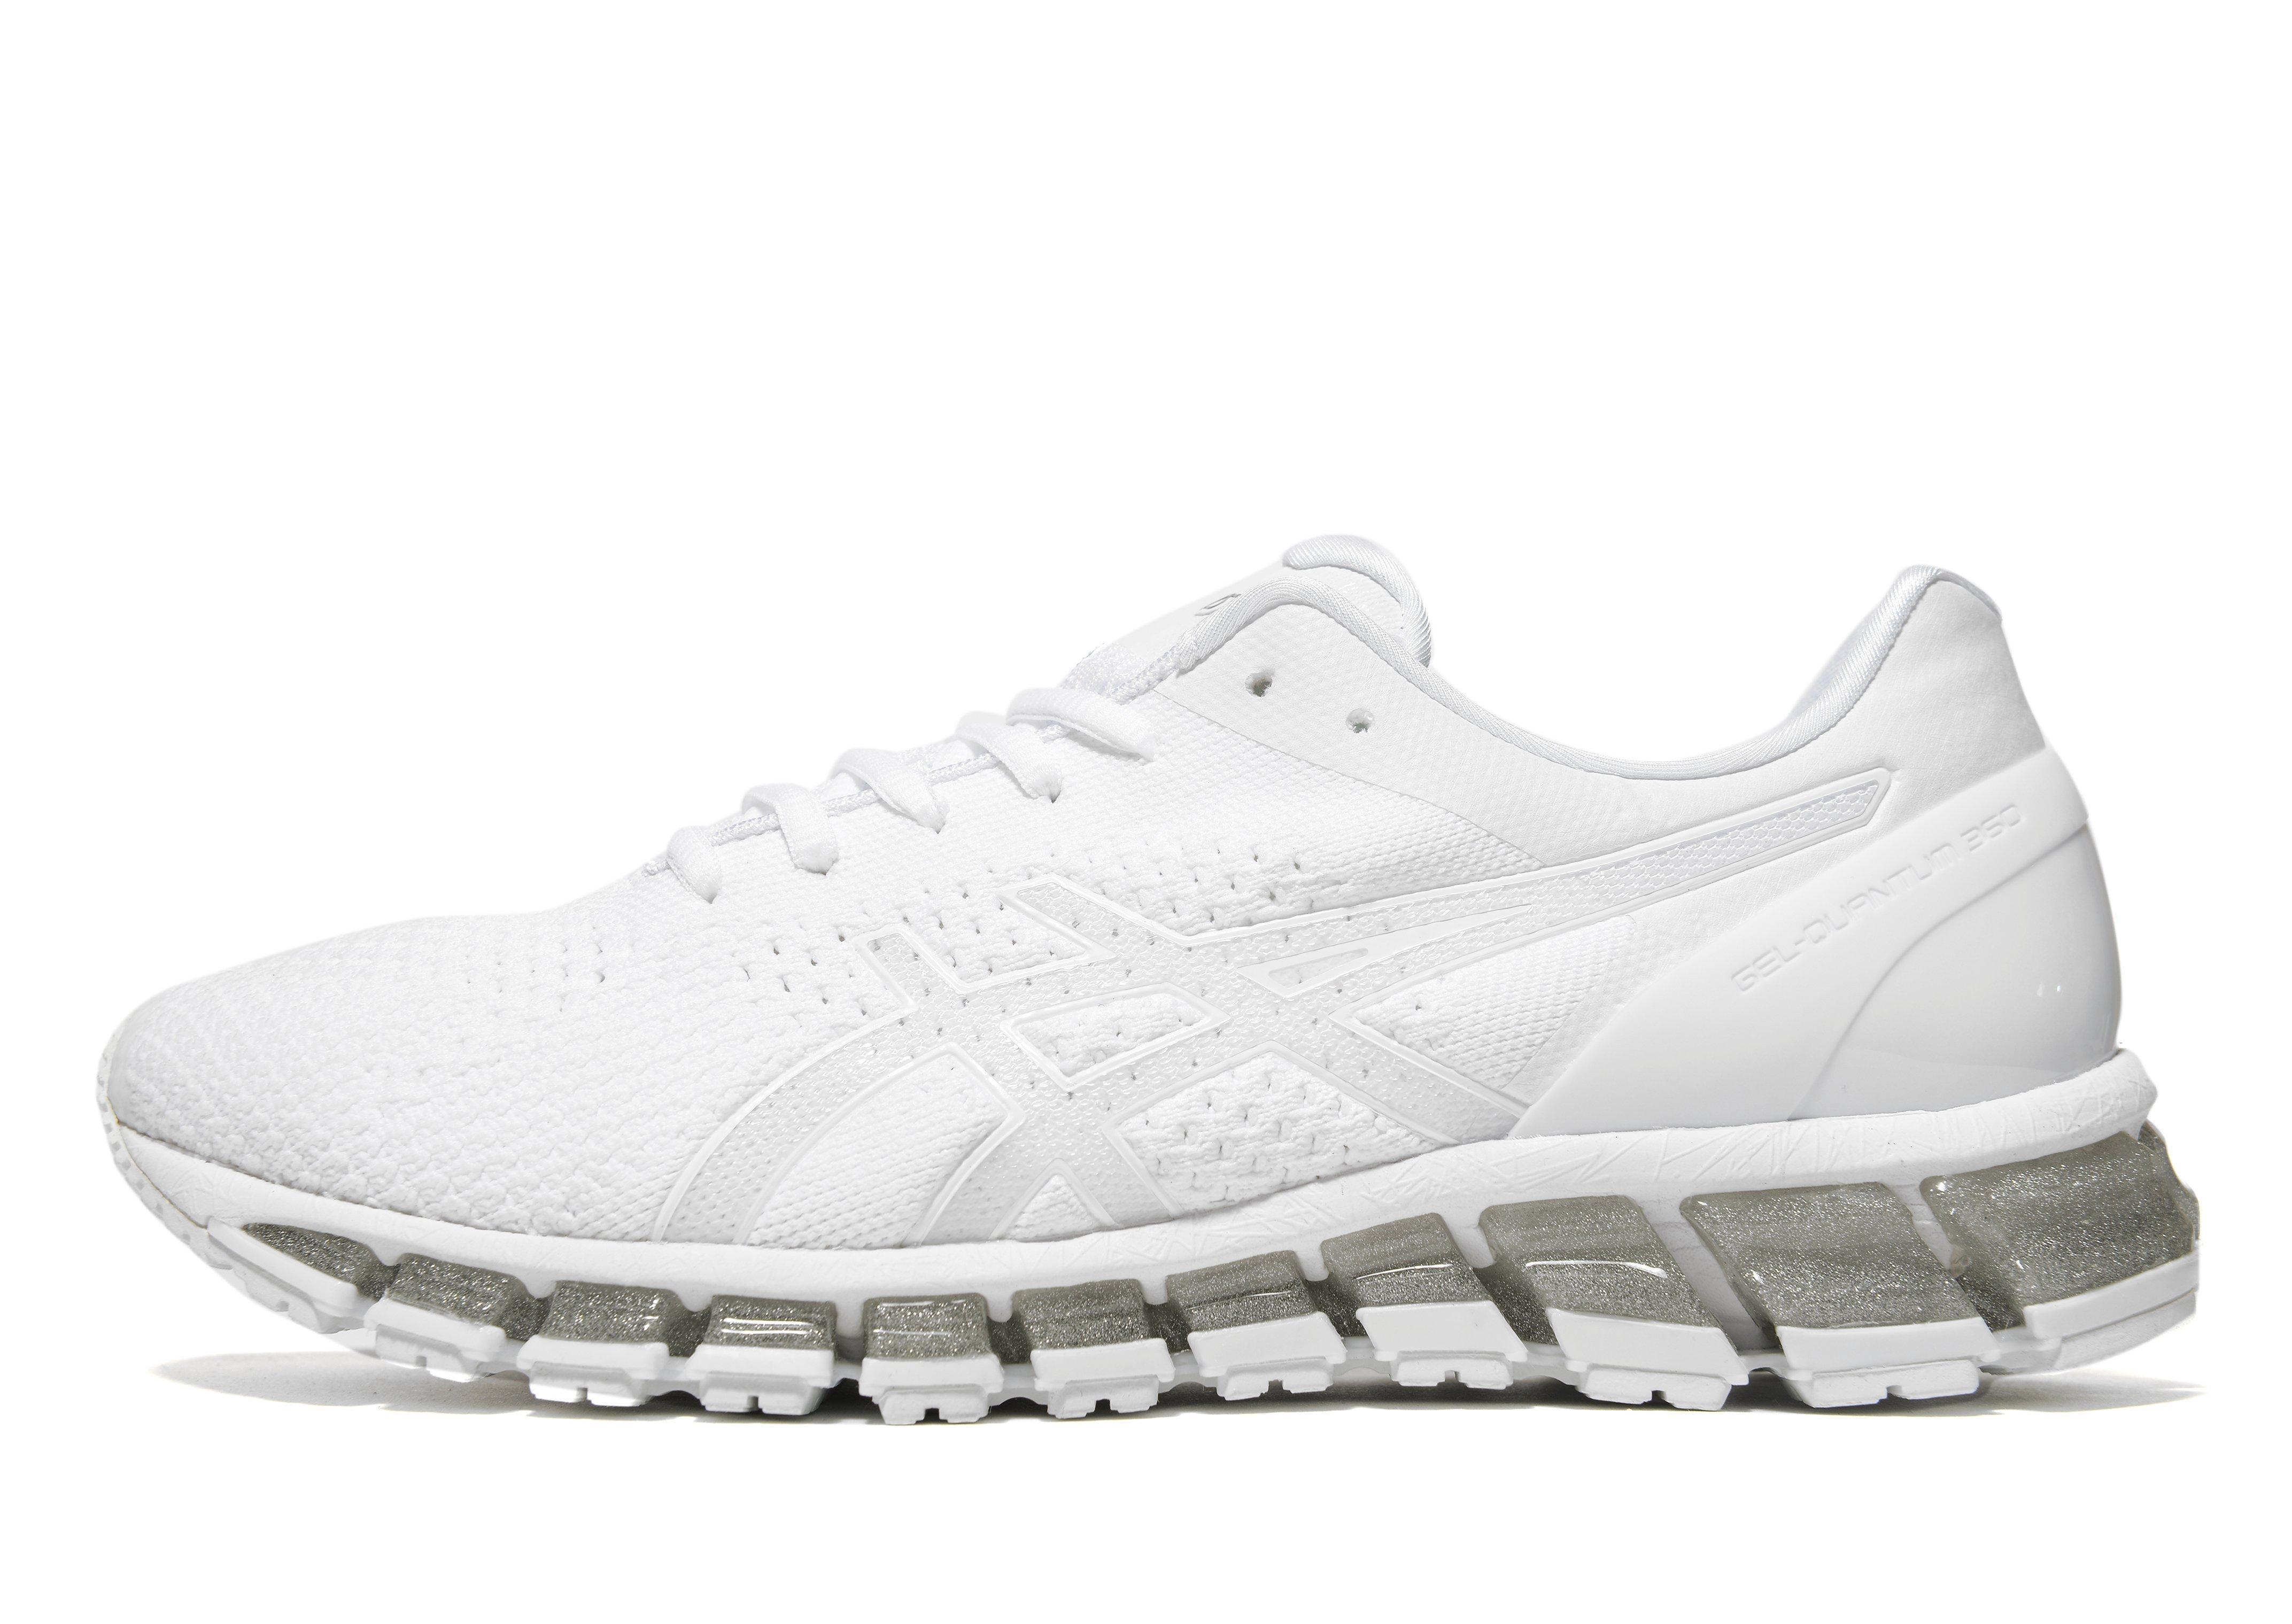 Asics 360 Quantum White Online Sale, UP TO 54% OFF